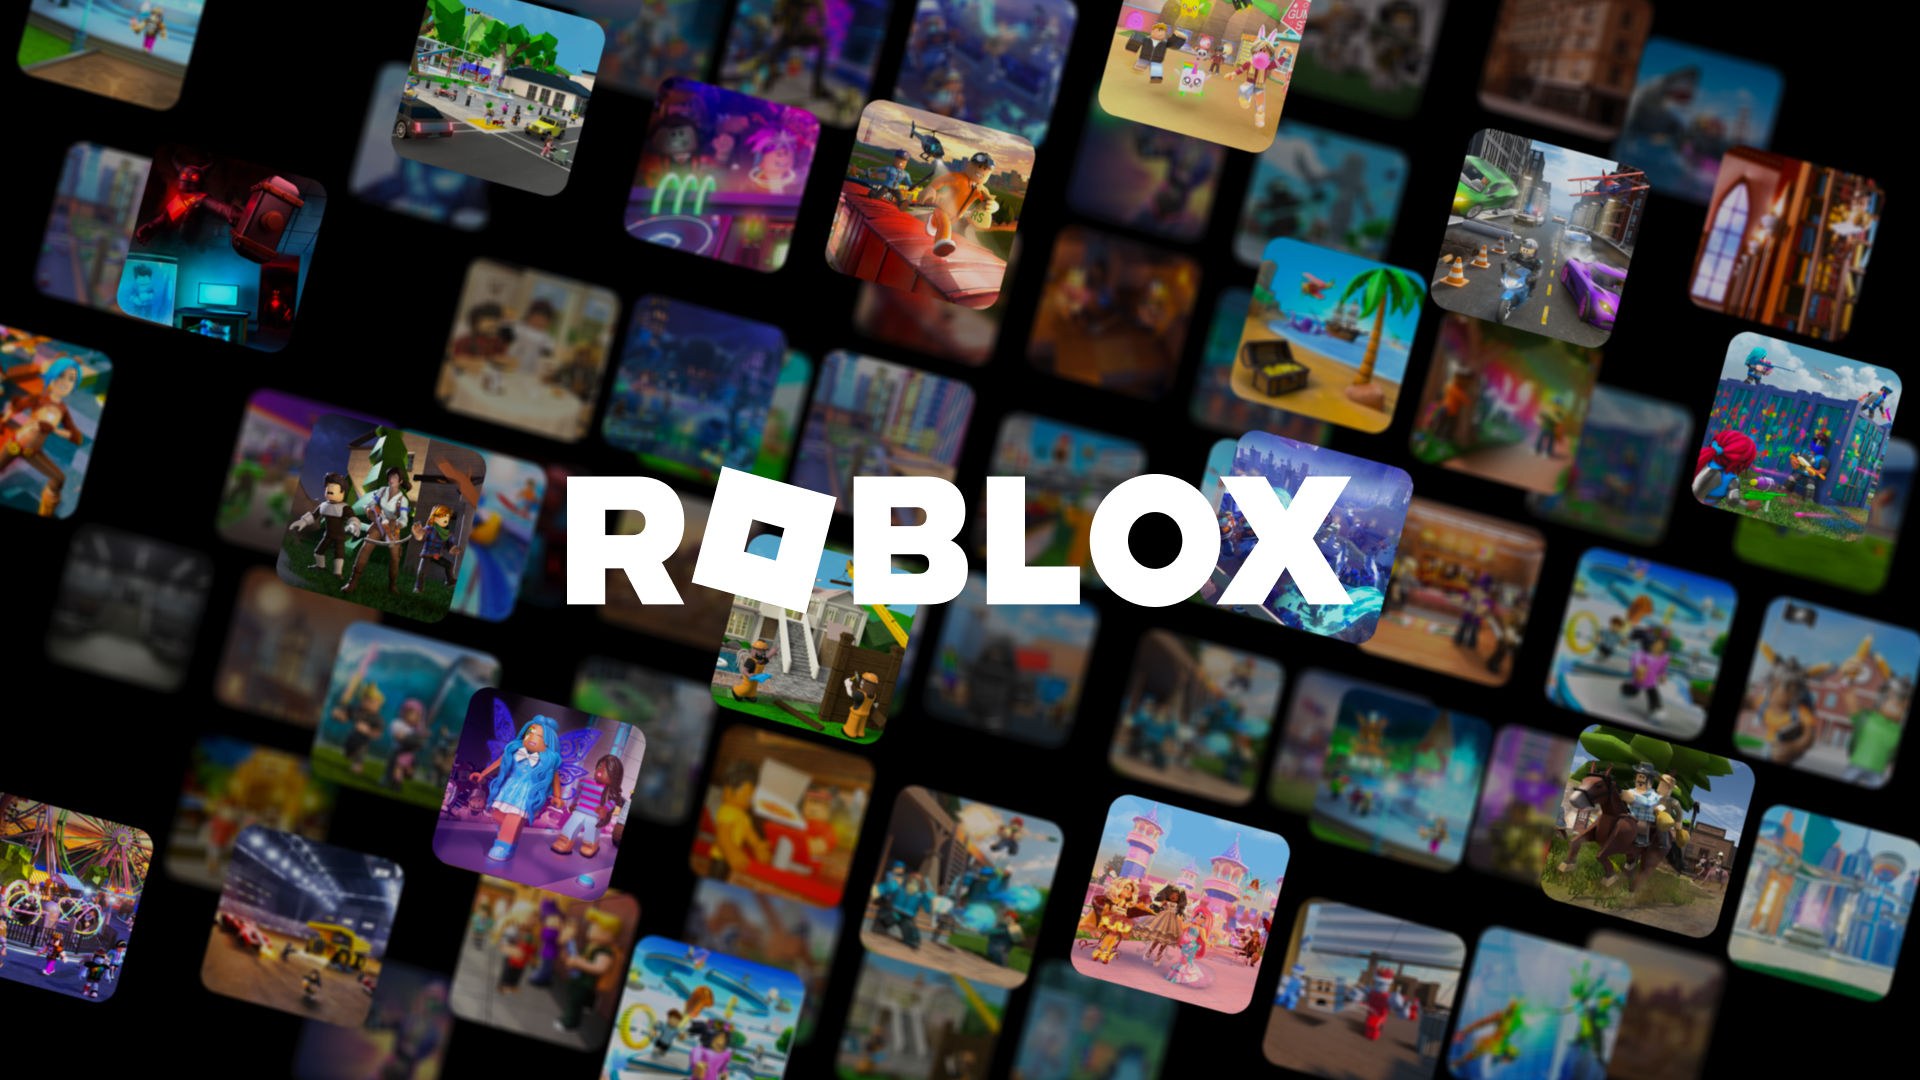 Generative AI on Roblox: Our Vision for the Future of Creation